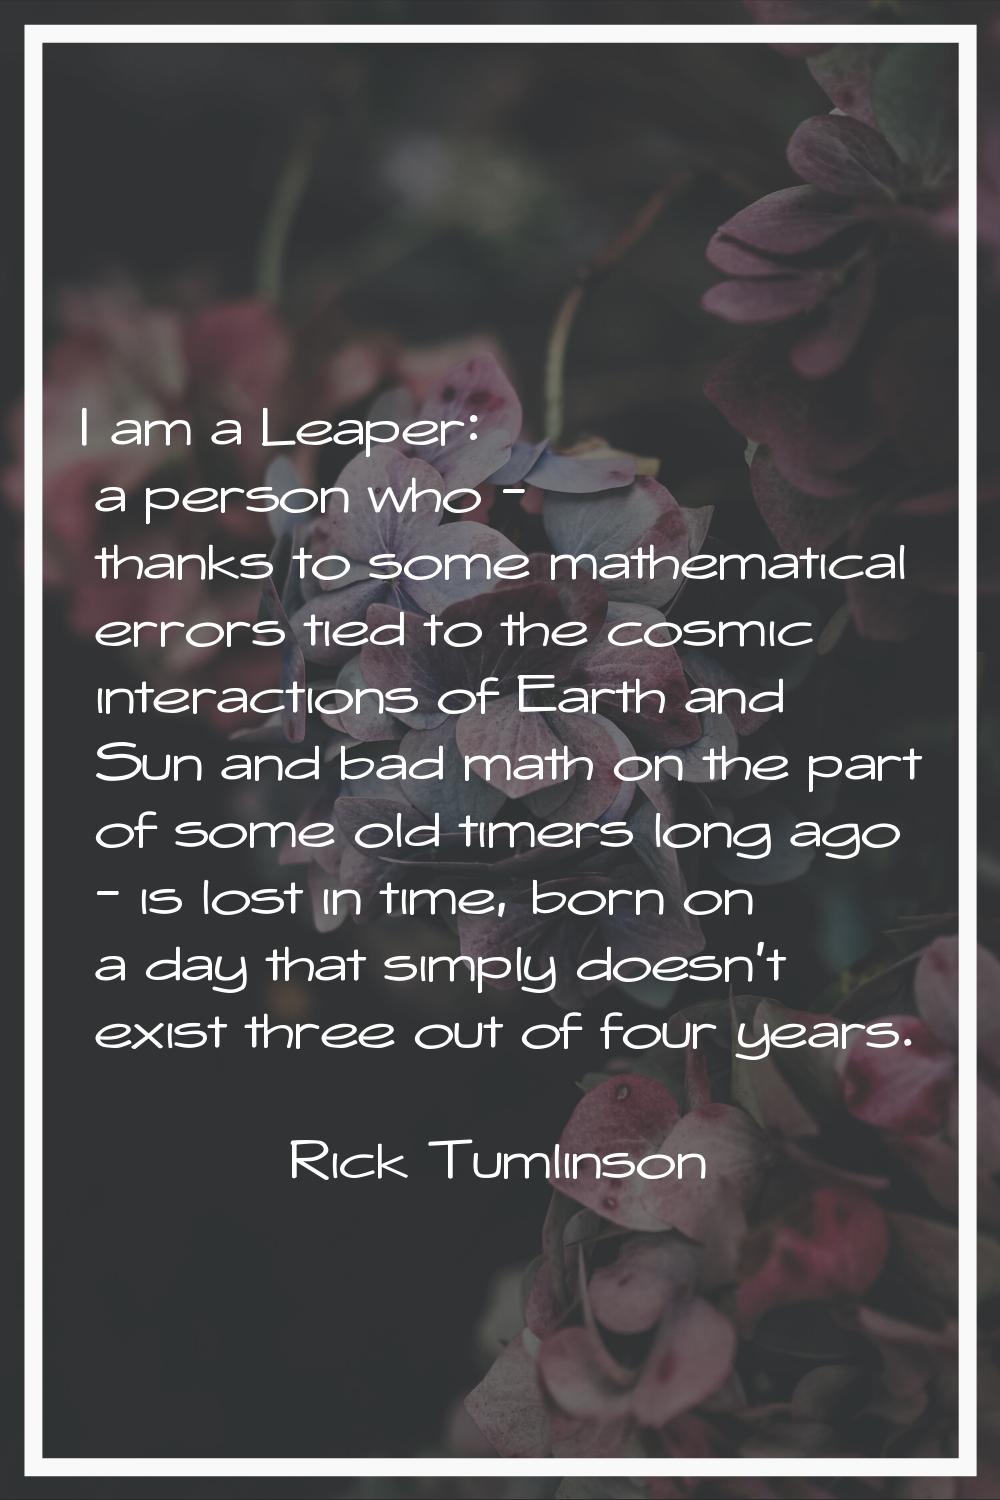 I am a Leaper: a person who - thanks to some mathematical errors tied to the cosmic interactions of